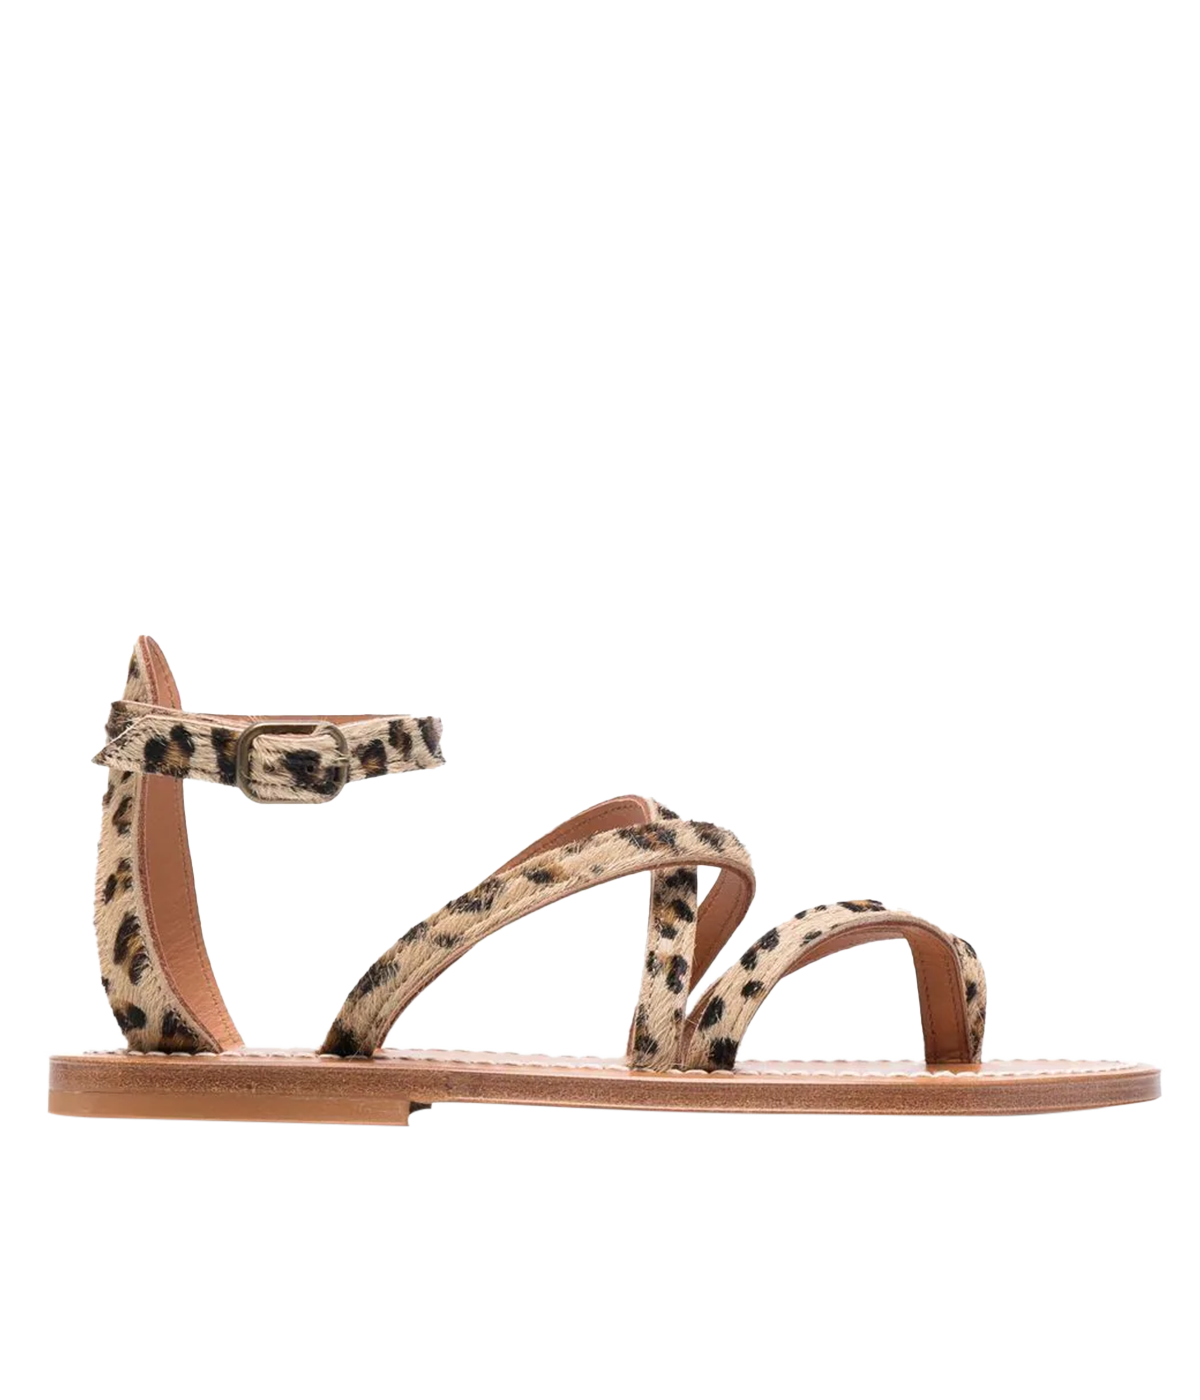 Epicure Sandals in Leopard